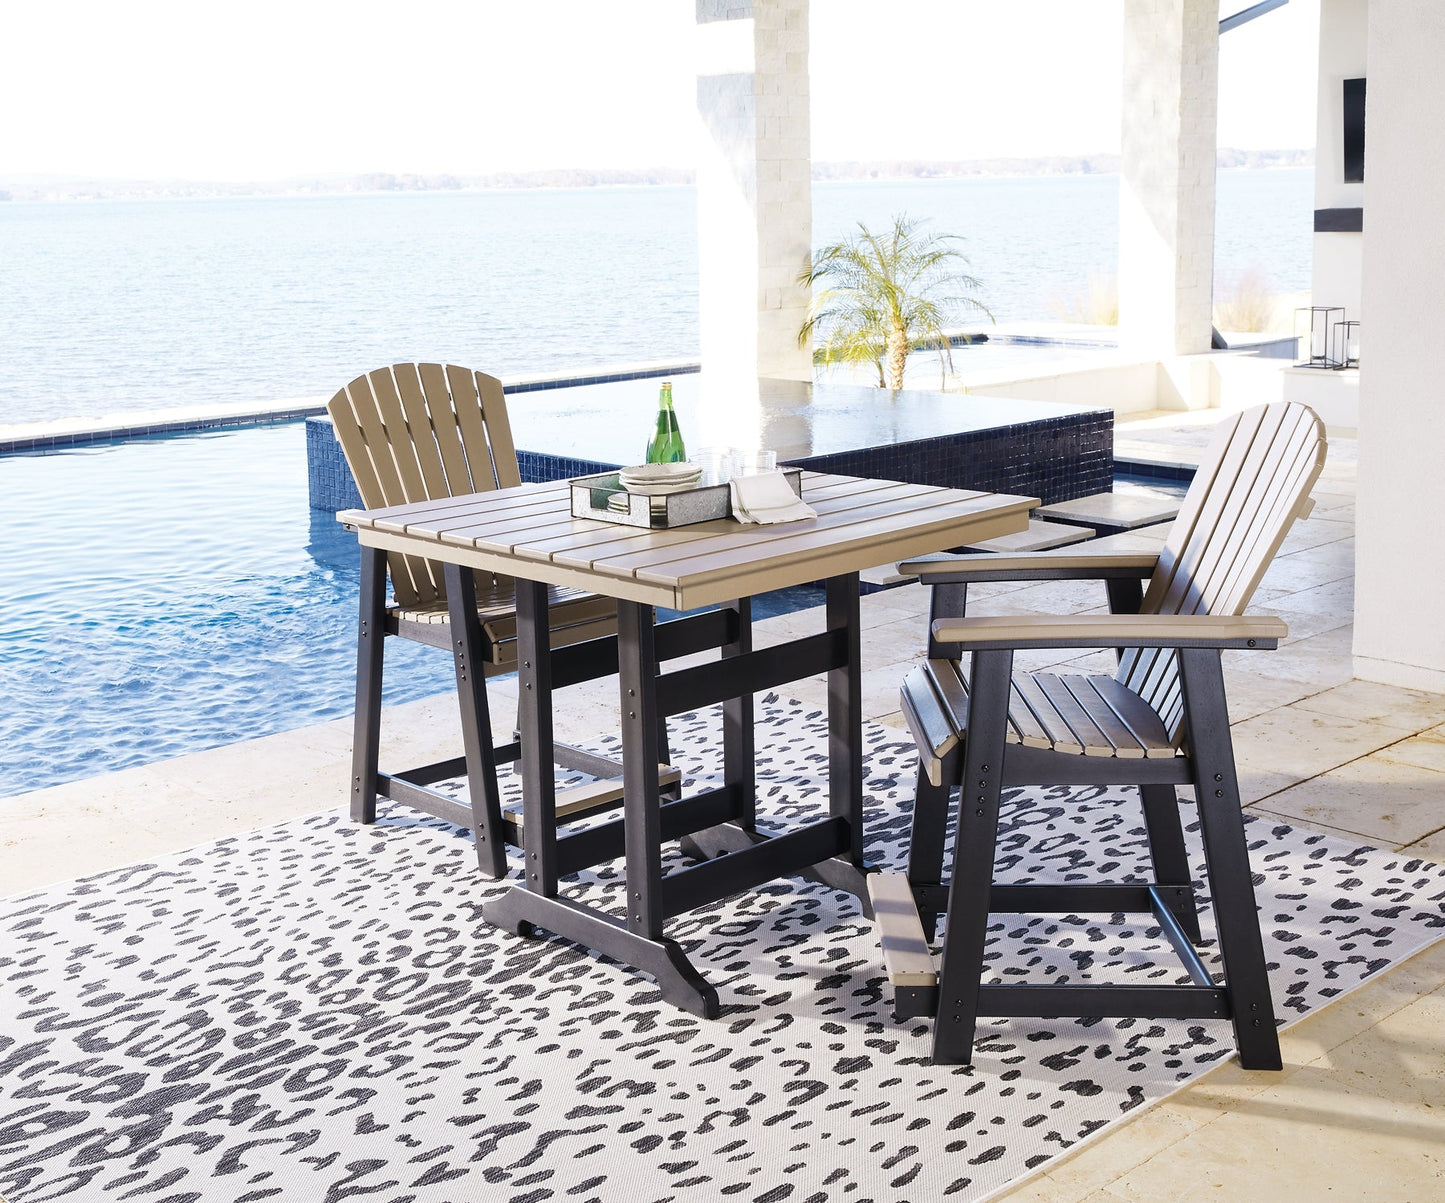 Fairen Trail Outdoor Counter Height Dining Table and 2 Barstools at Walker Mattress and Furniture Locations in Cedar Park and Belton TX.